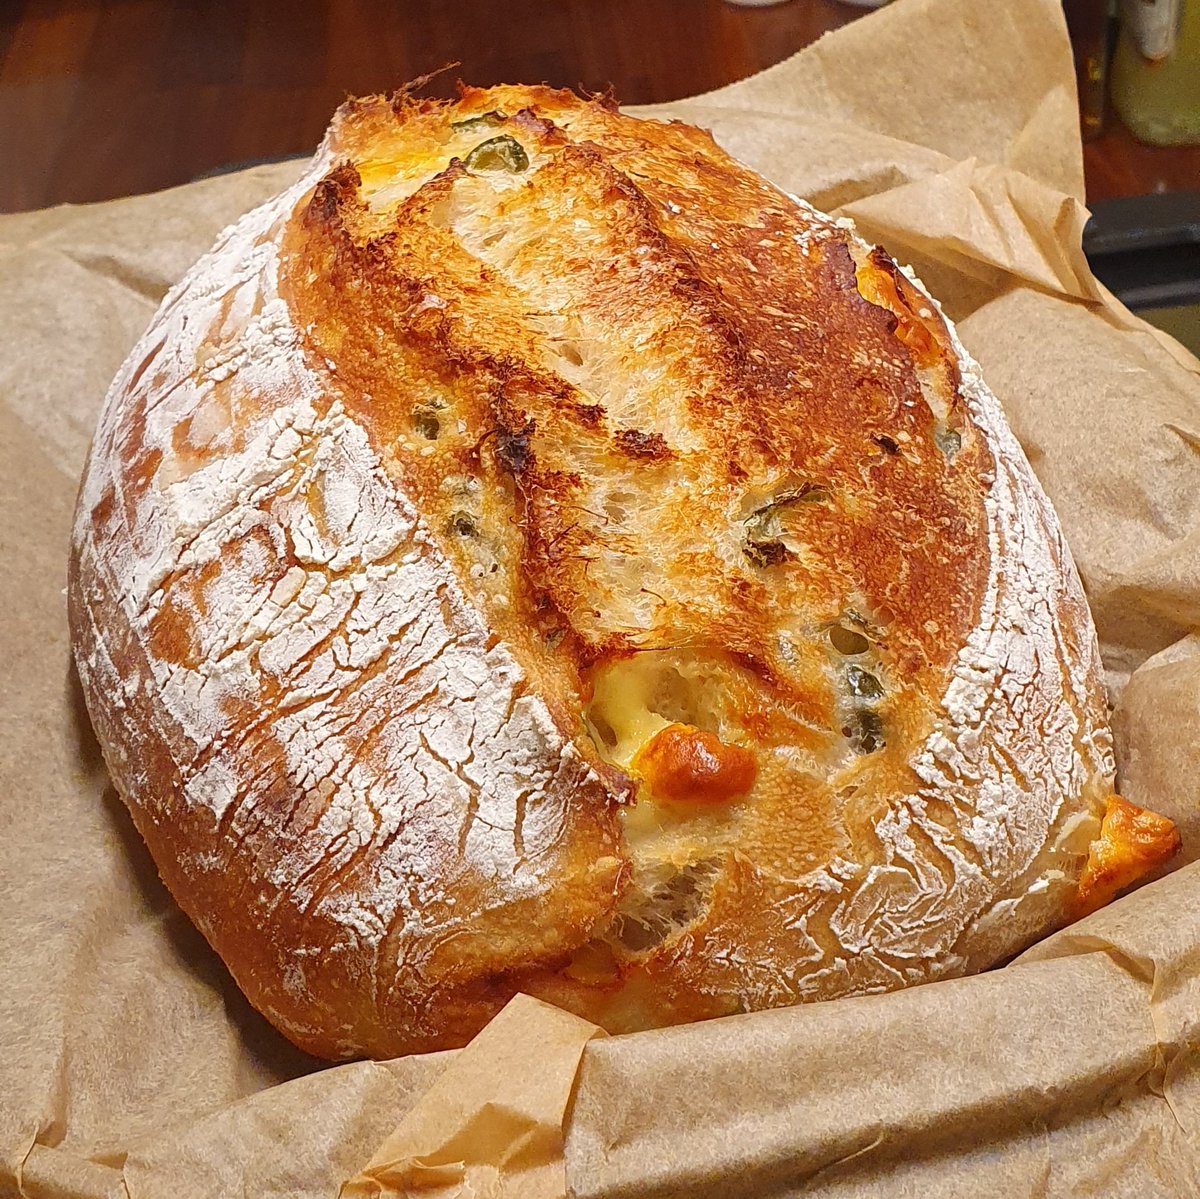 As I try to get my head around the #USSmess, proposed @ucu measures to address casualisation in #UKHE, and a real terms pay cut as 'final offer', #sourdough baking is grounding me. Just made a Gouda and Jalapeño loaf. Can it be lunchtime soon? 🙏✊️ @ucustandrews